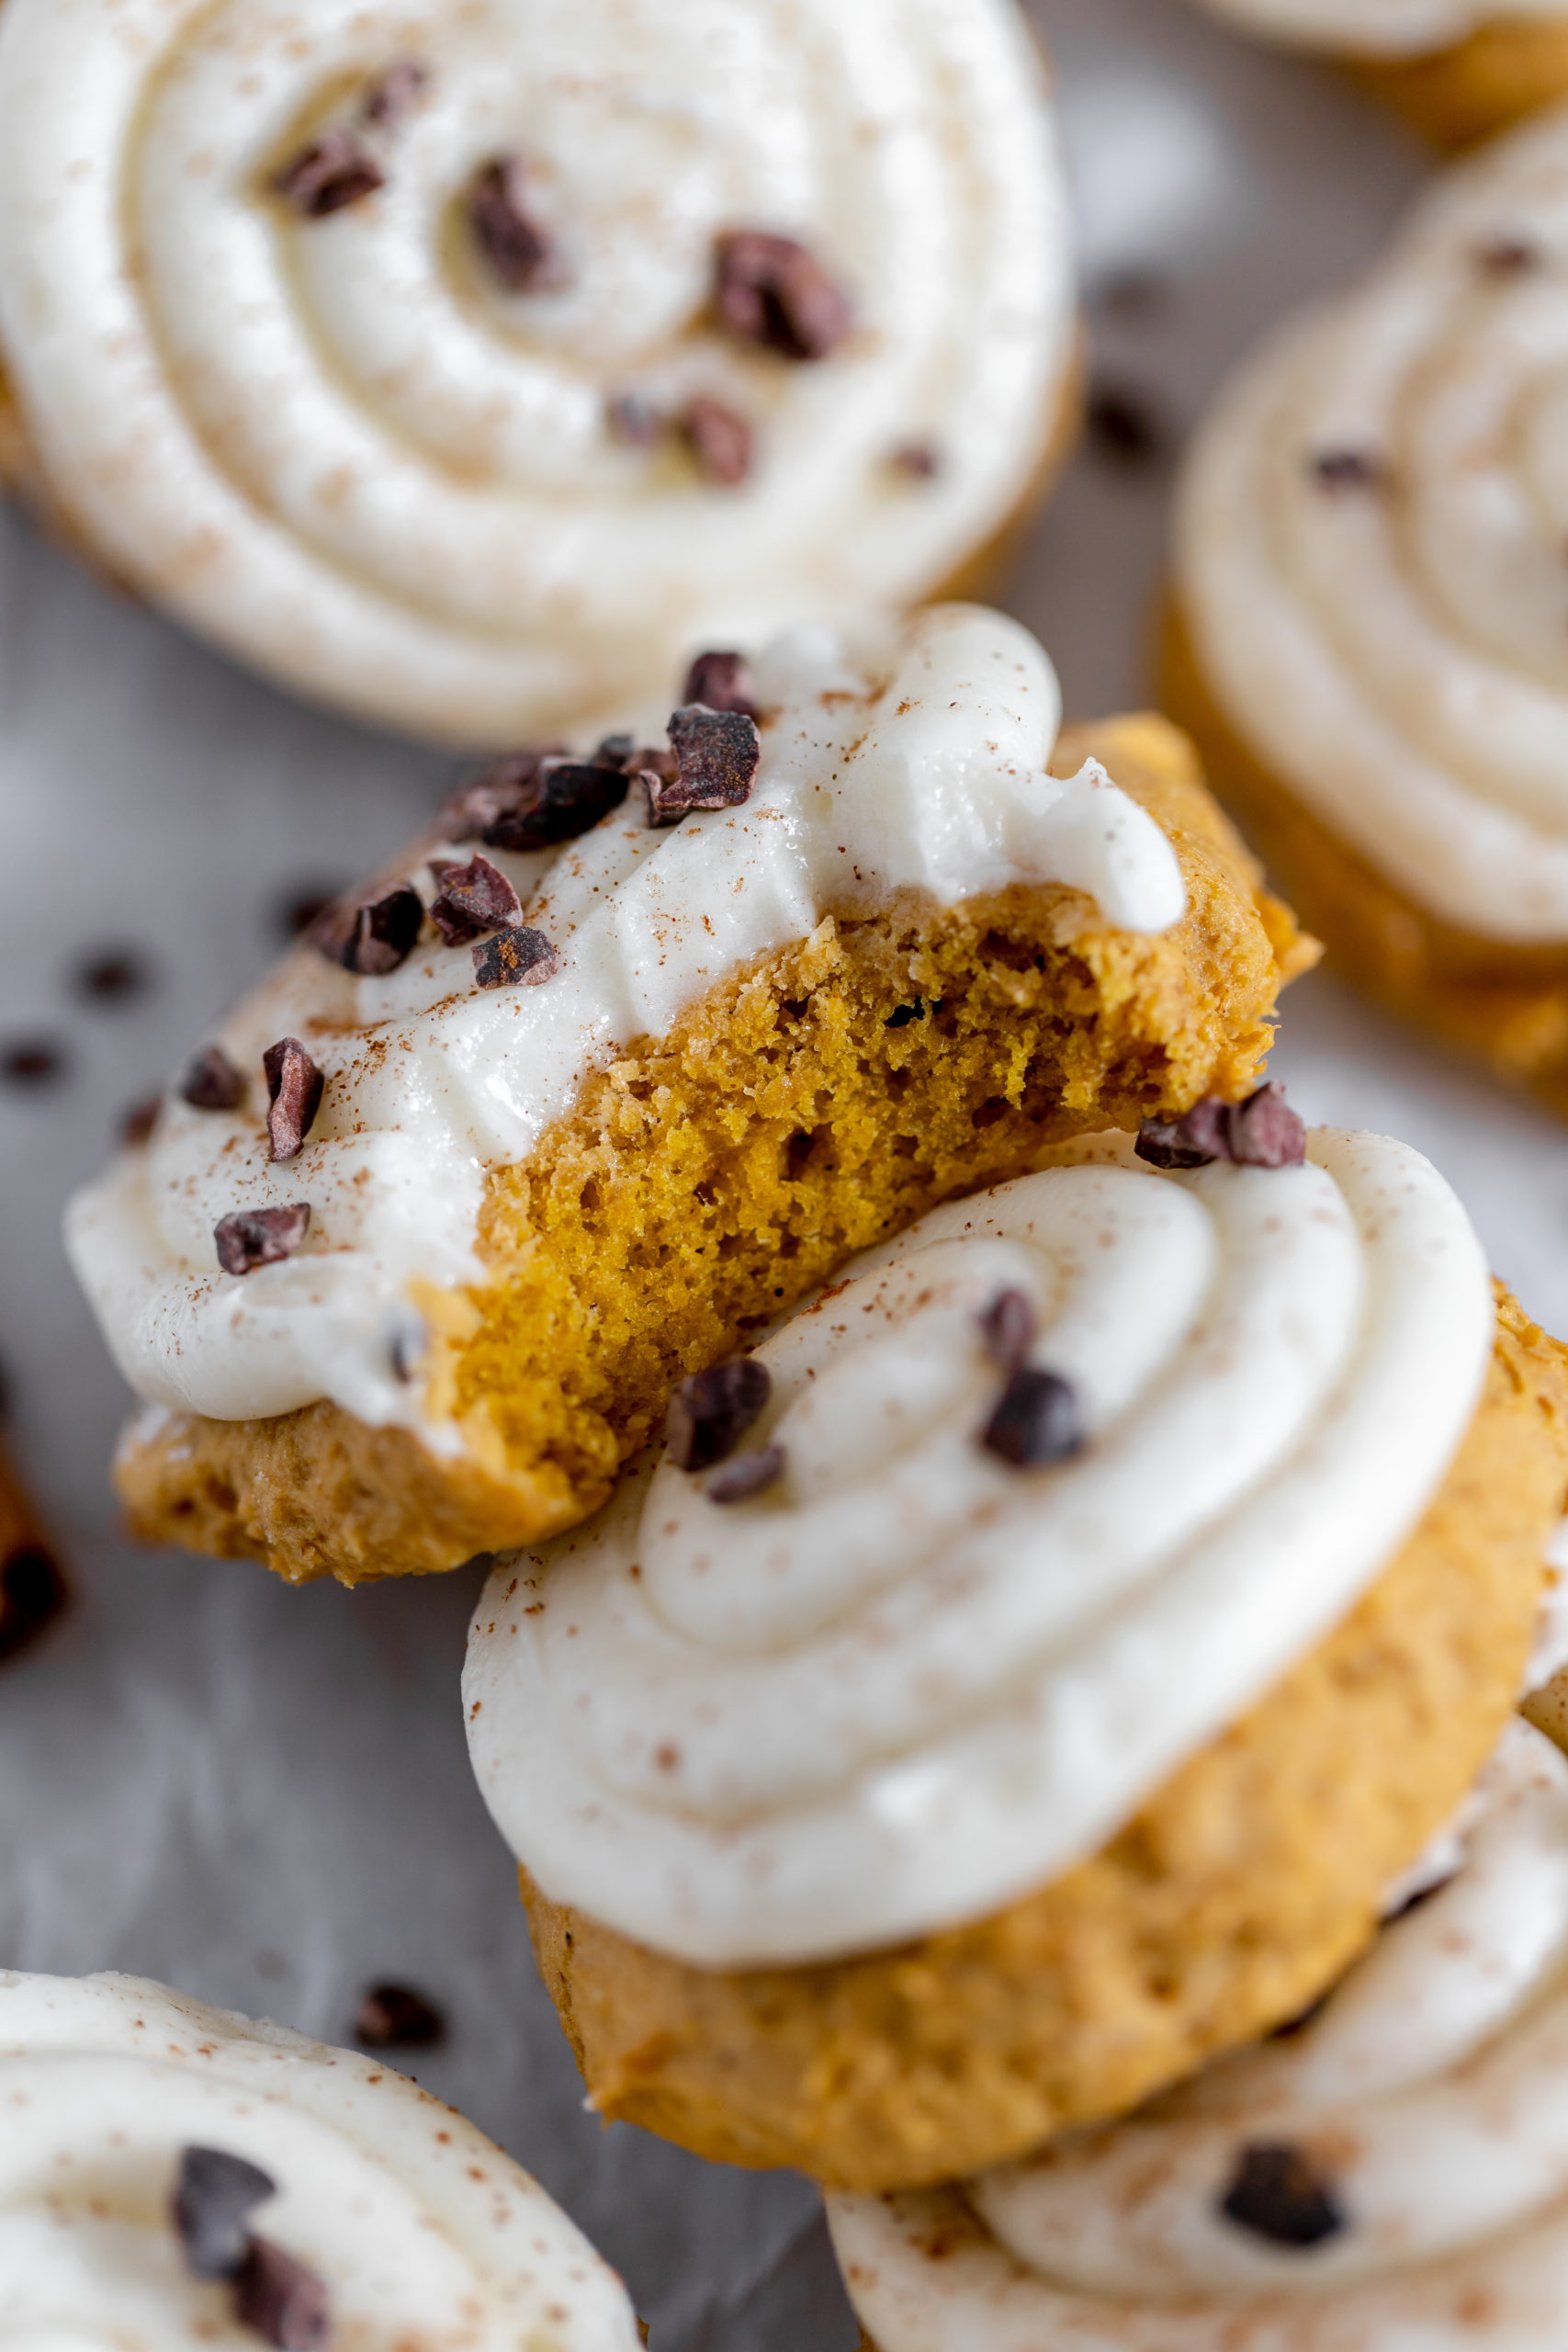 Image shows a close up of gluten free pumpkin cookie with icing and cacao bits